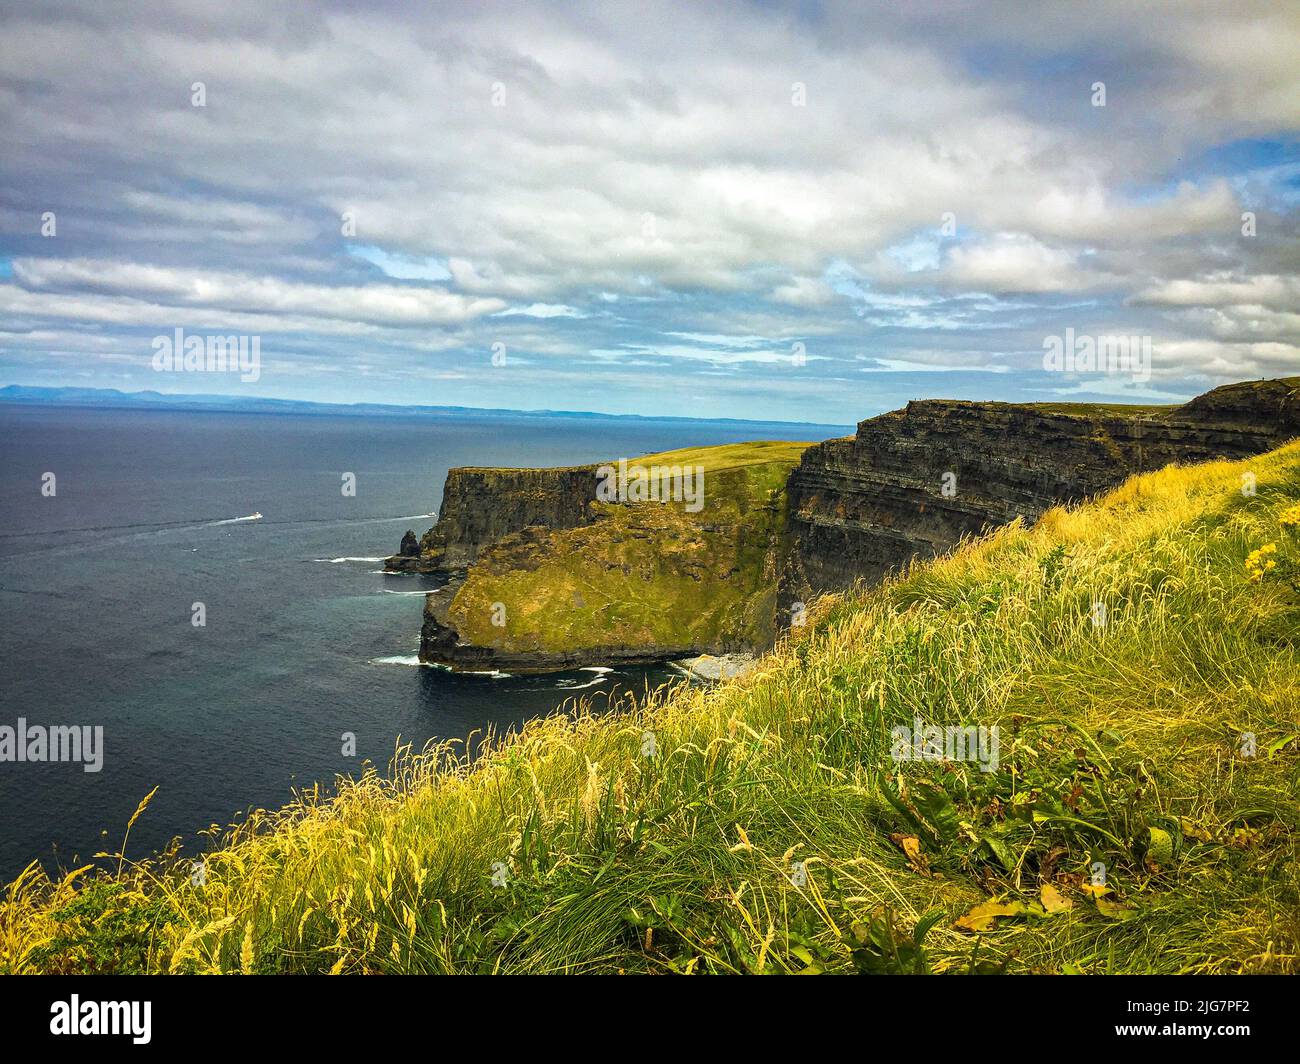 A beautiful view of the Cliffs of Moher above the sea under a cloudy sky Stock Photo